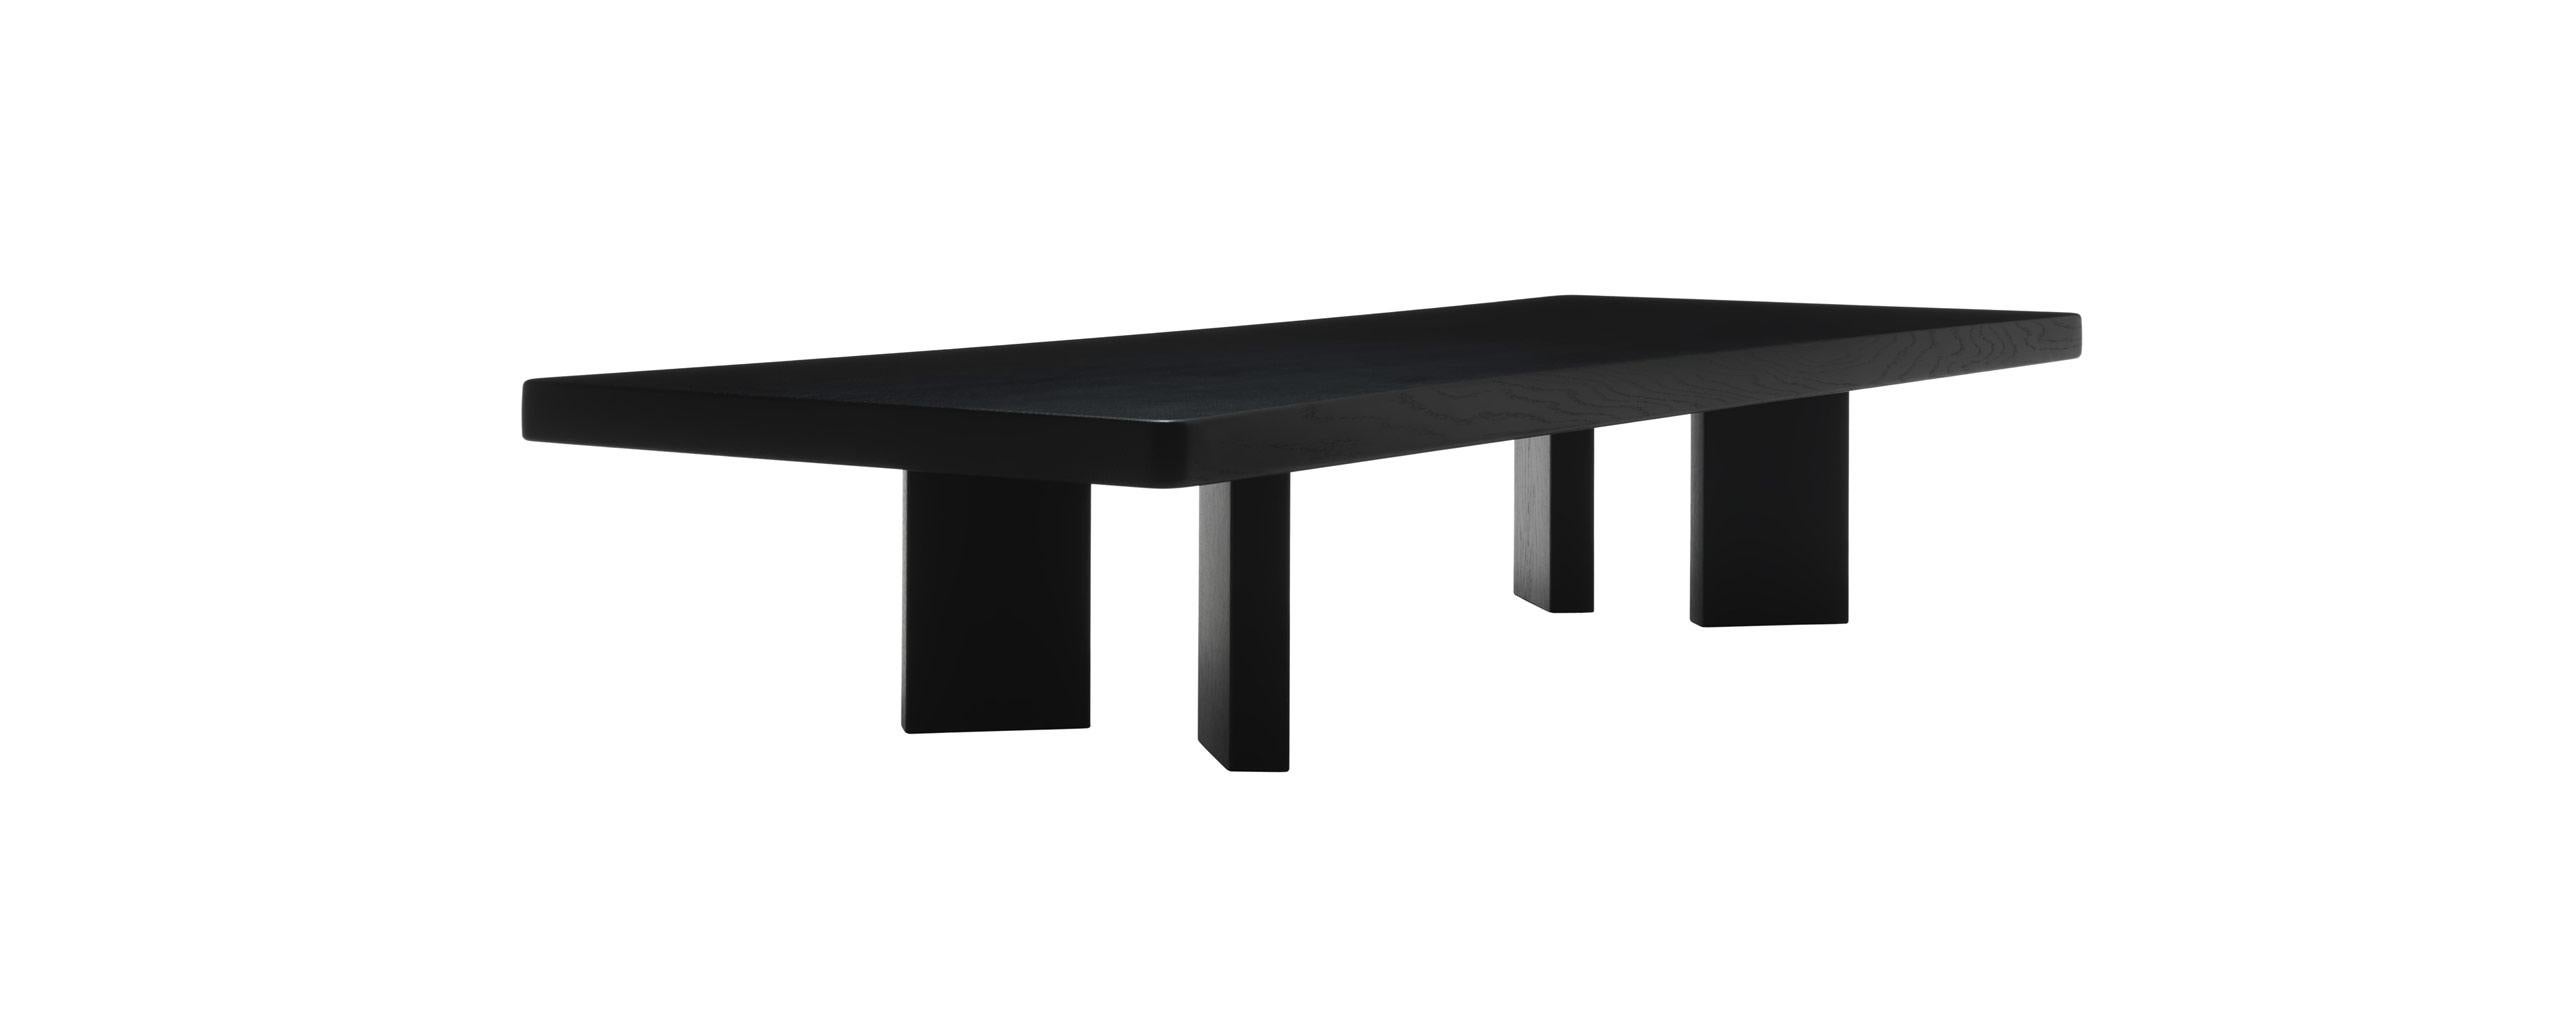 Italian Charlotte Perriand 515 Plana Coffee Table, Black Stained Wood by Cassina